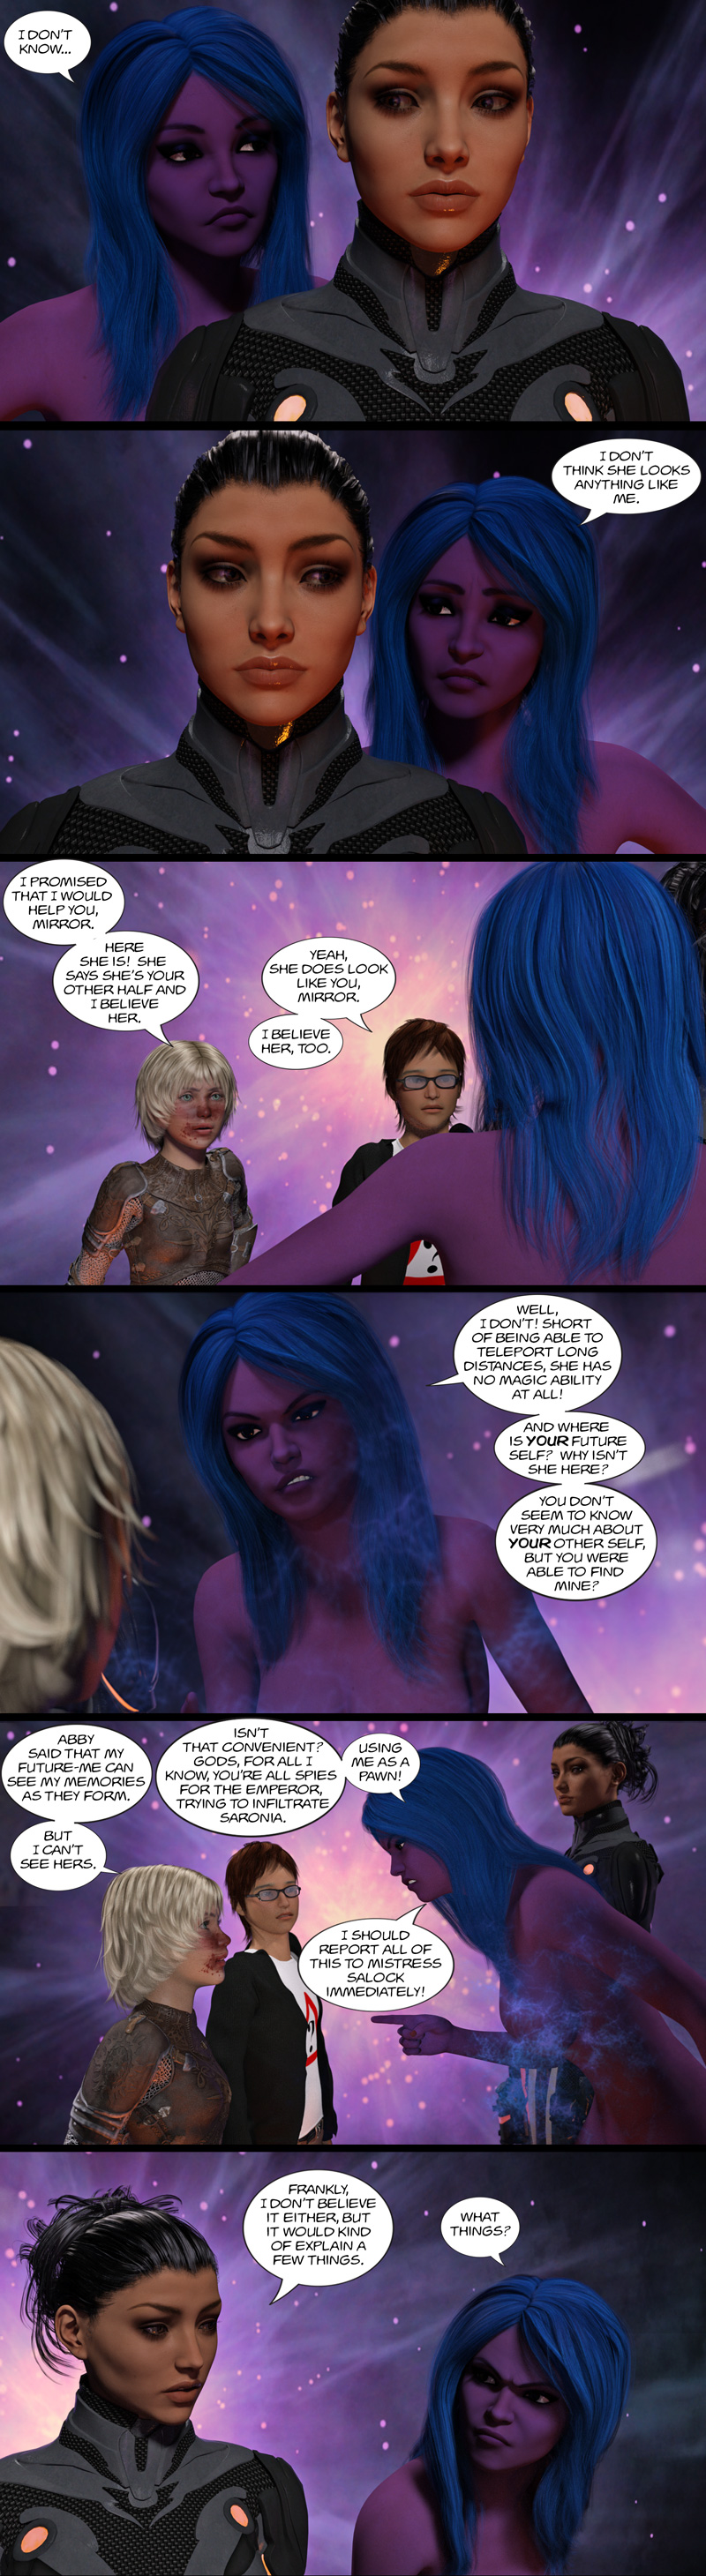 Chapter 13, page 13 – Mirror meets Abby